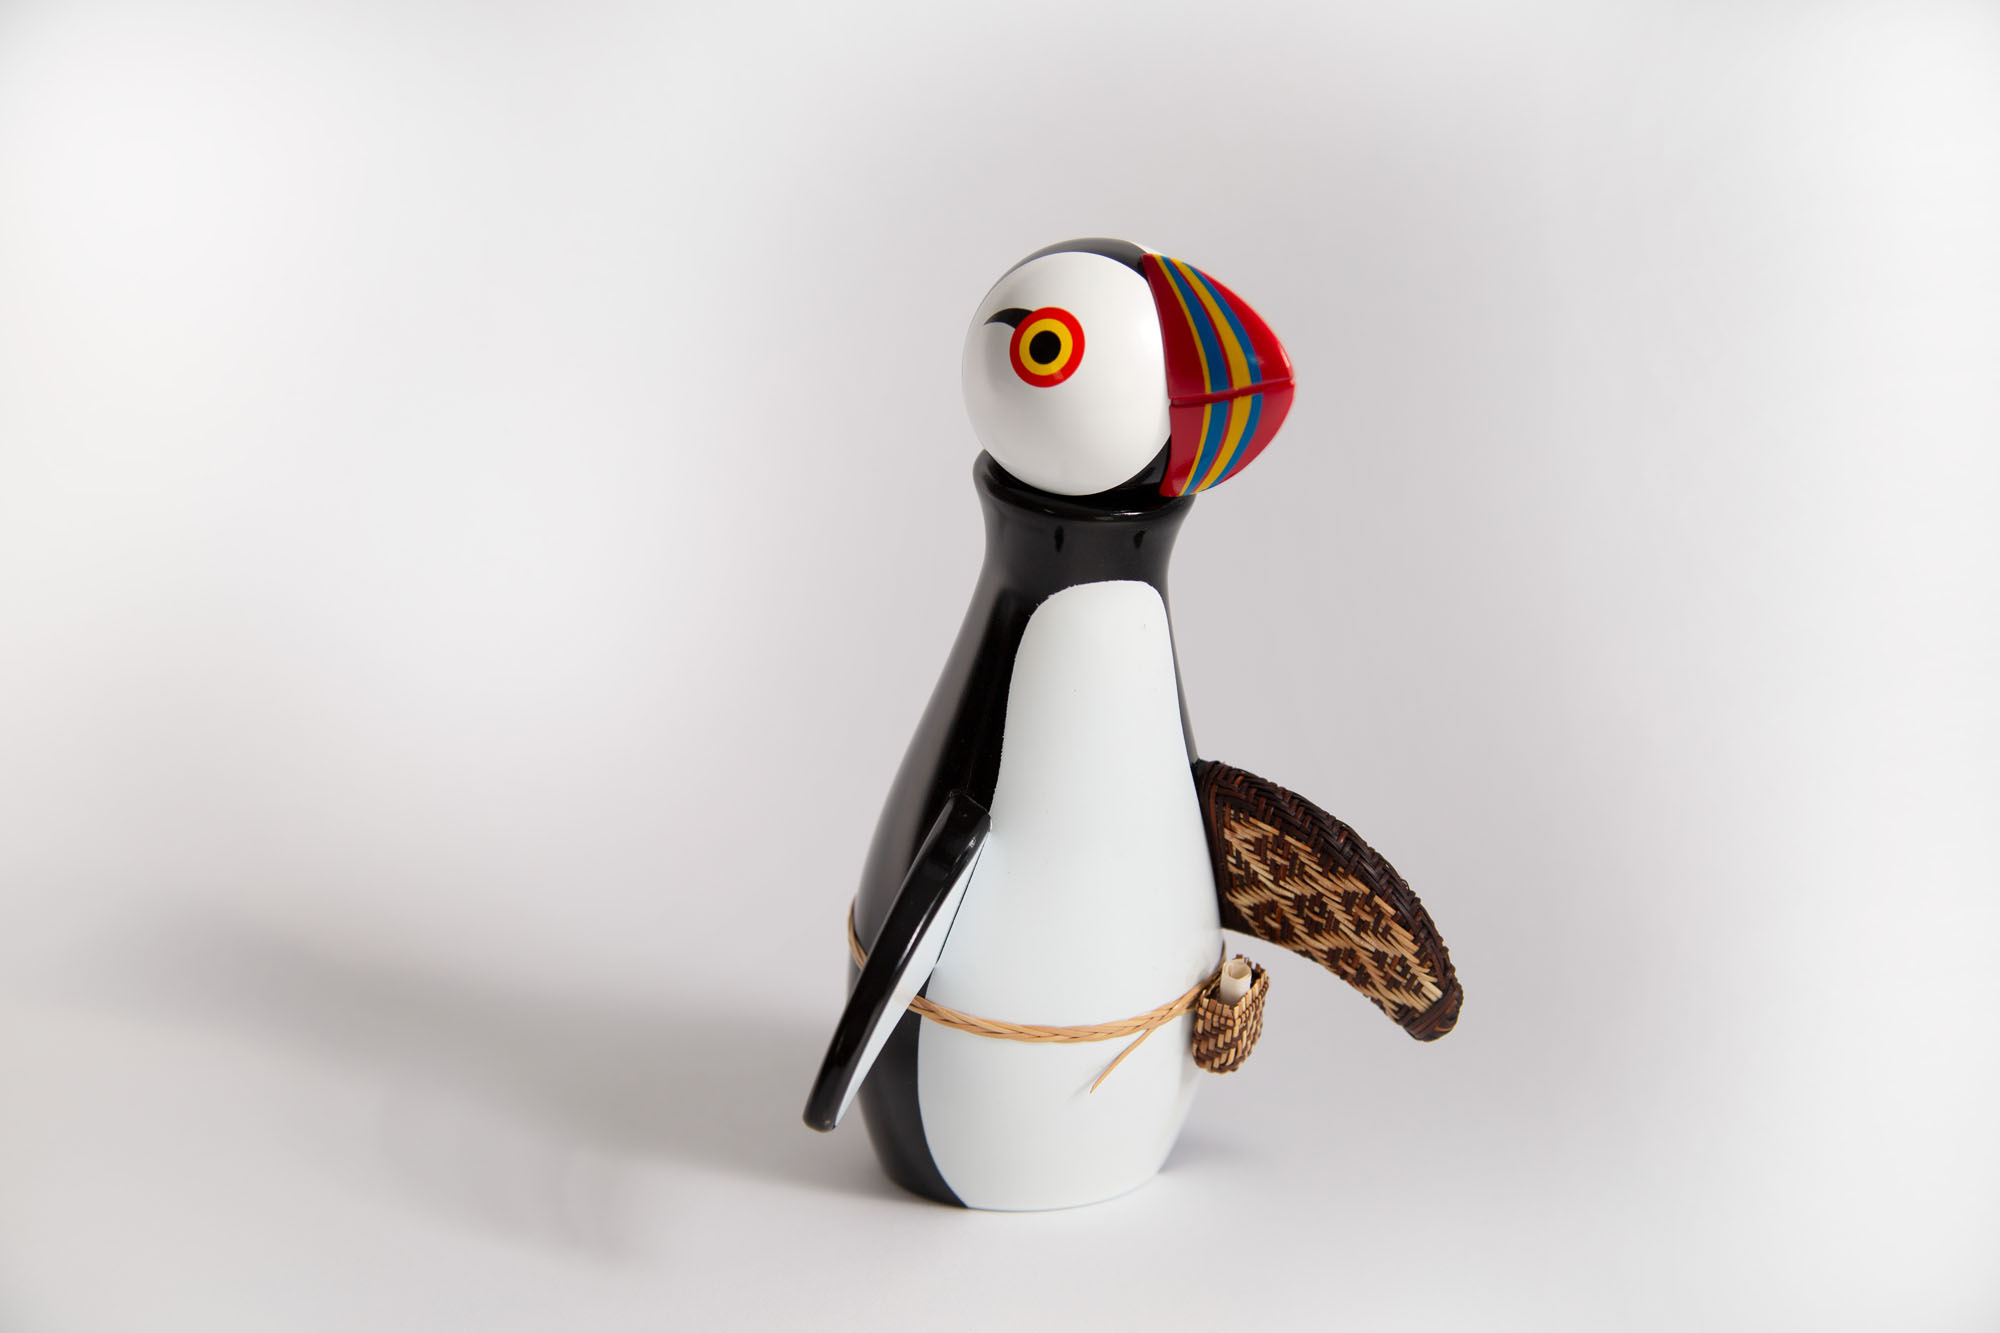 an image of a puffin figurine